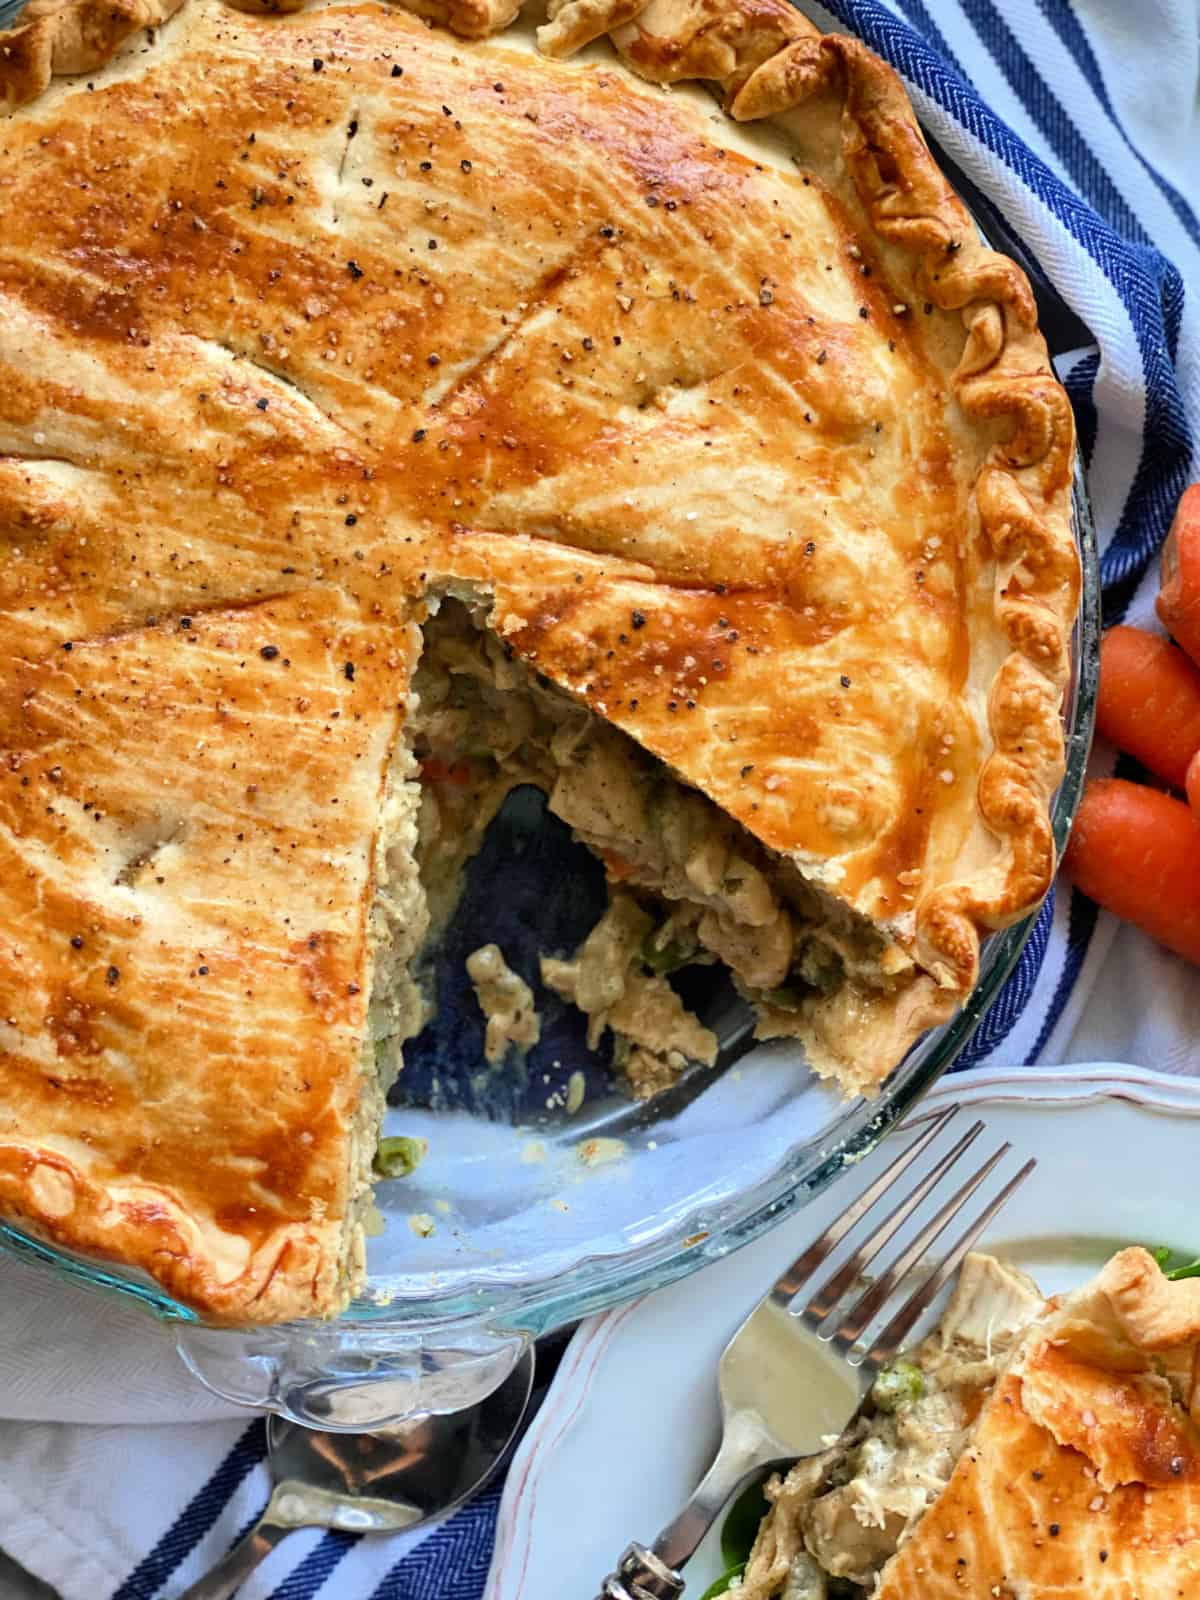 chicken pot pie with one slice cut out on a blue and white stripped cloth, a plate with a slice of chicken pot pie, a spoon, a fork, and carrots